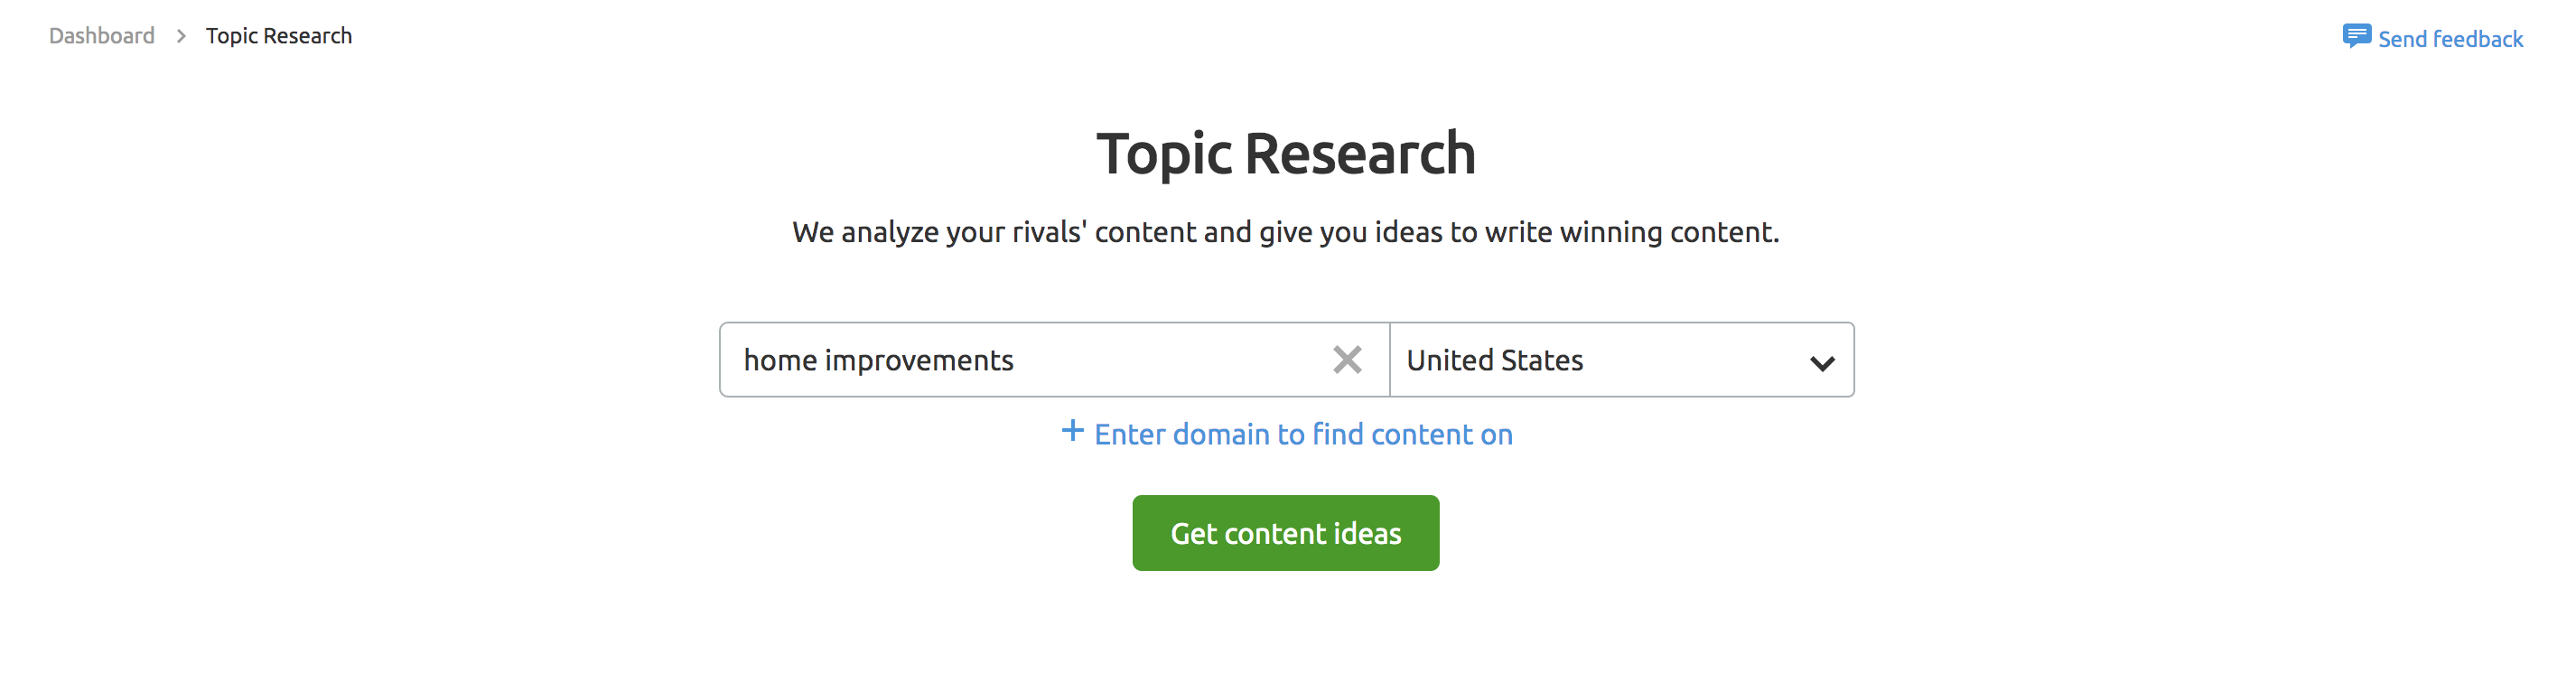 Topic Research Tool